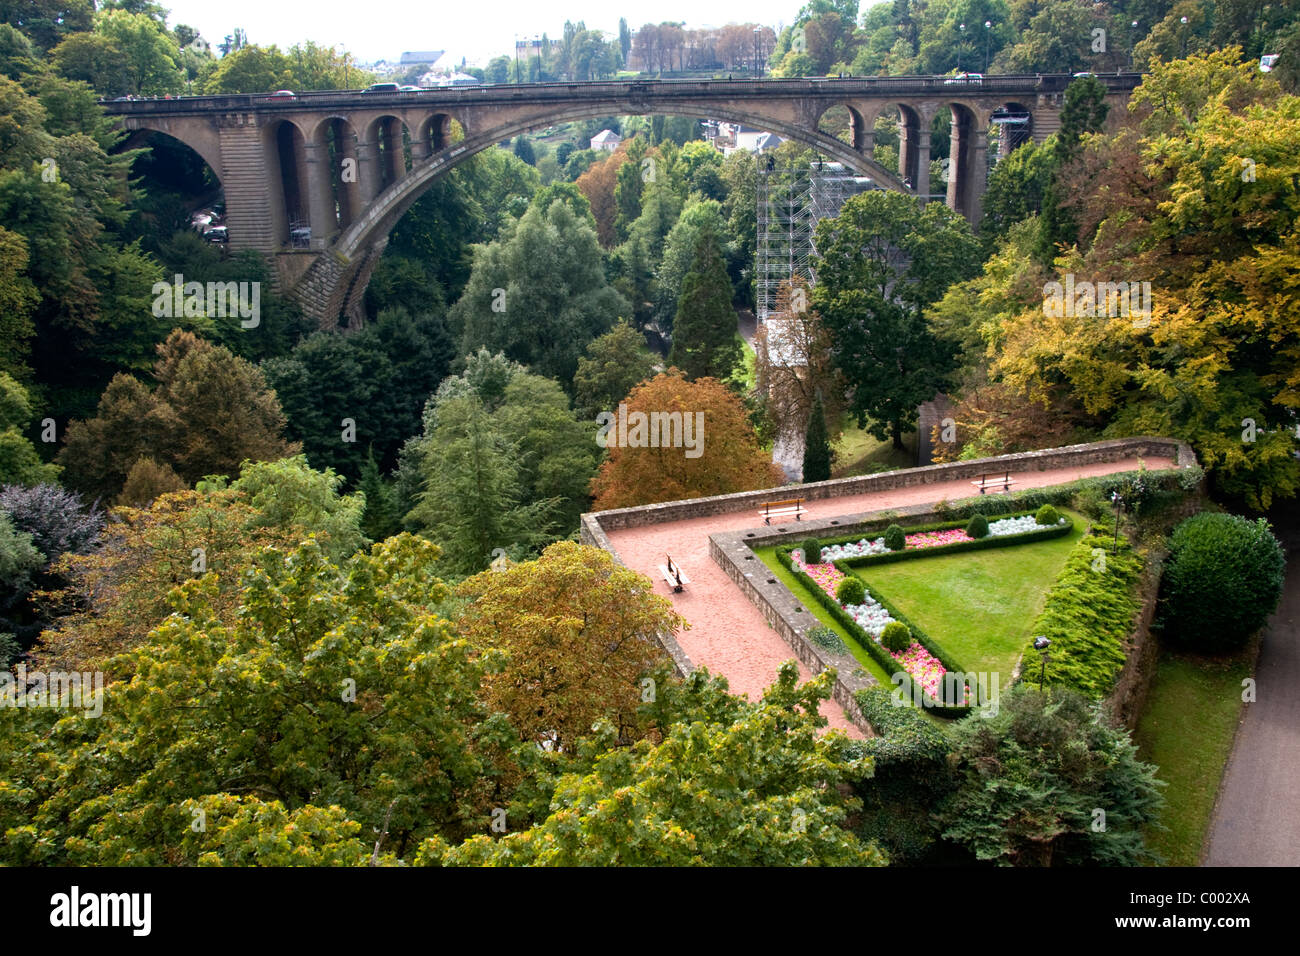 The Adolphe Bridge in Luxembourg City, Luxembourg. Stock Photo